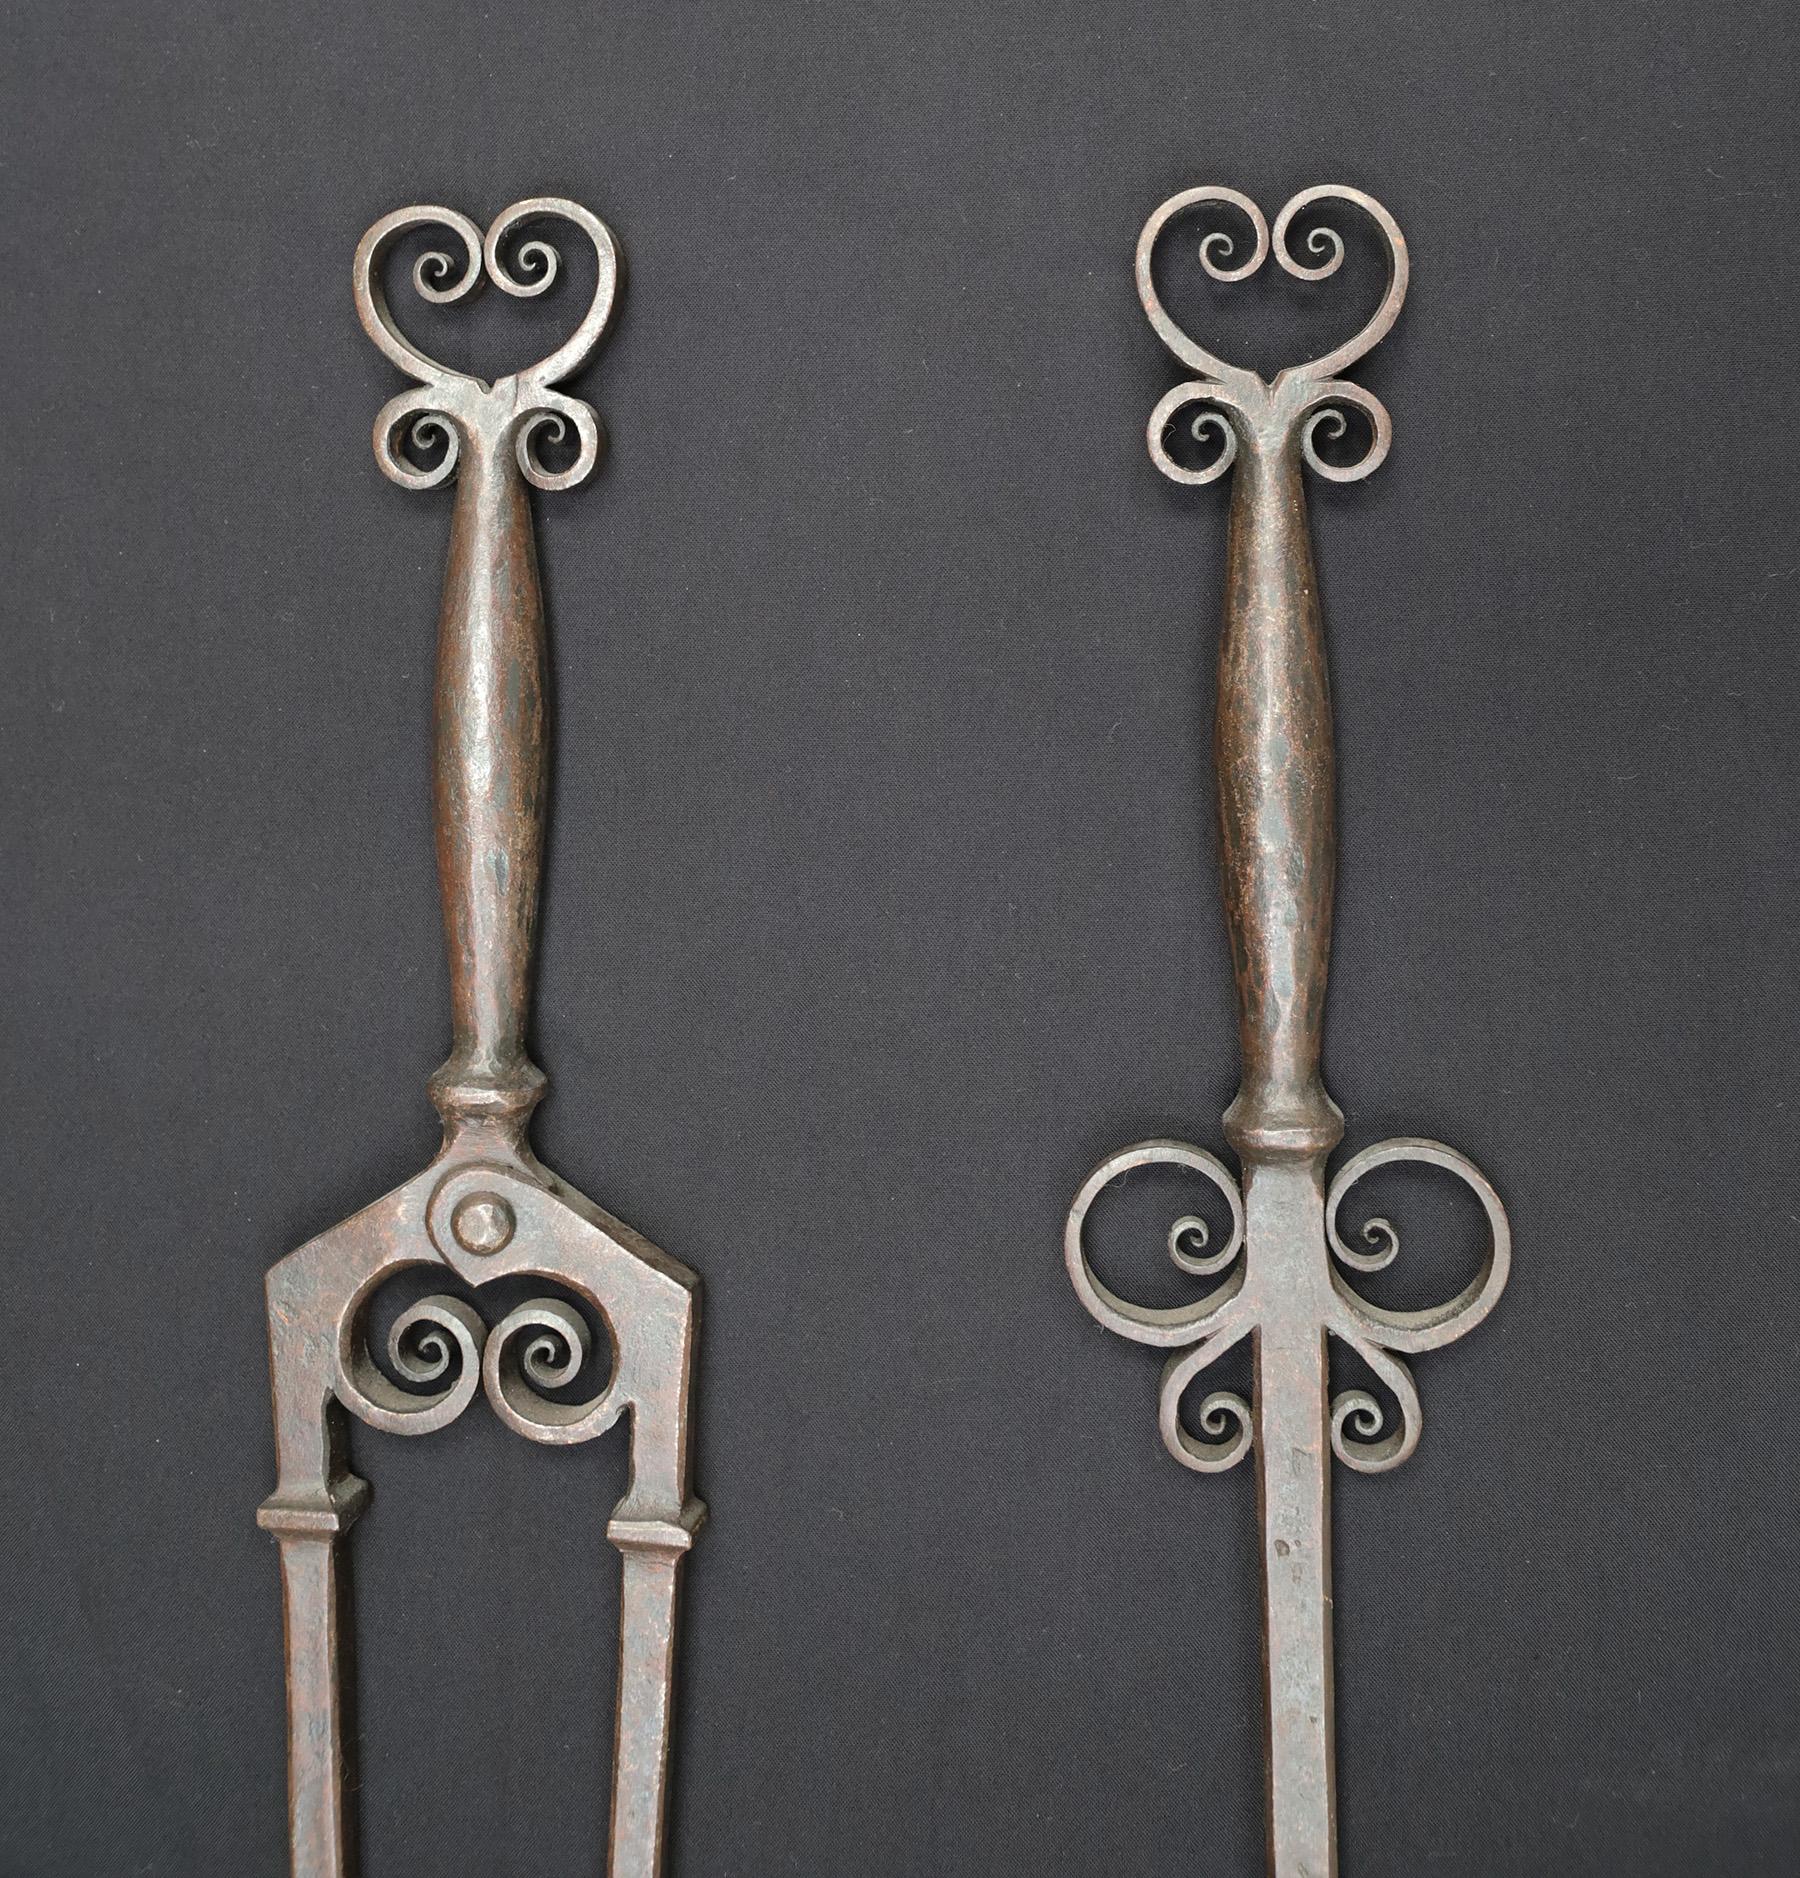 An exceptional set of Aesthetic movement wrought-iron fire tools with scrollwork. The set comprises of a set of tongs, poker and shovel. The handles with carefully scrolled finials, scroll-work to shafts, spear detail to poker end and heart-shaped